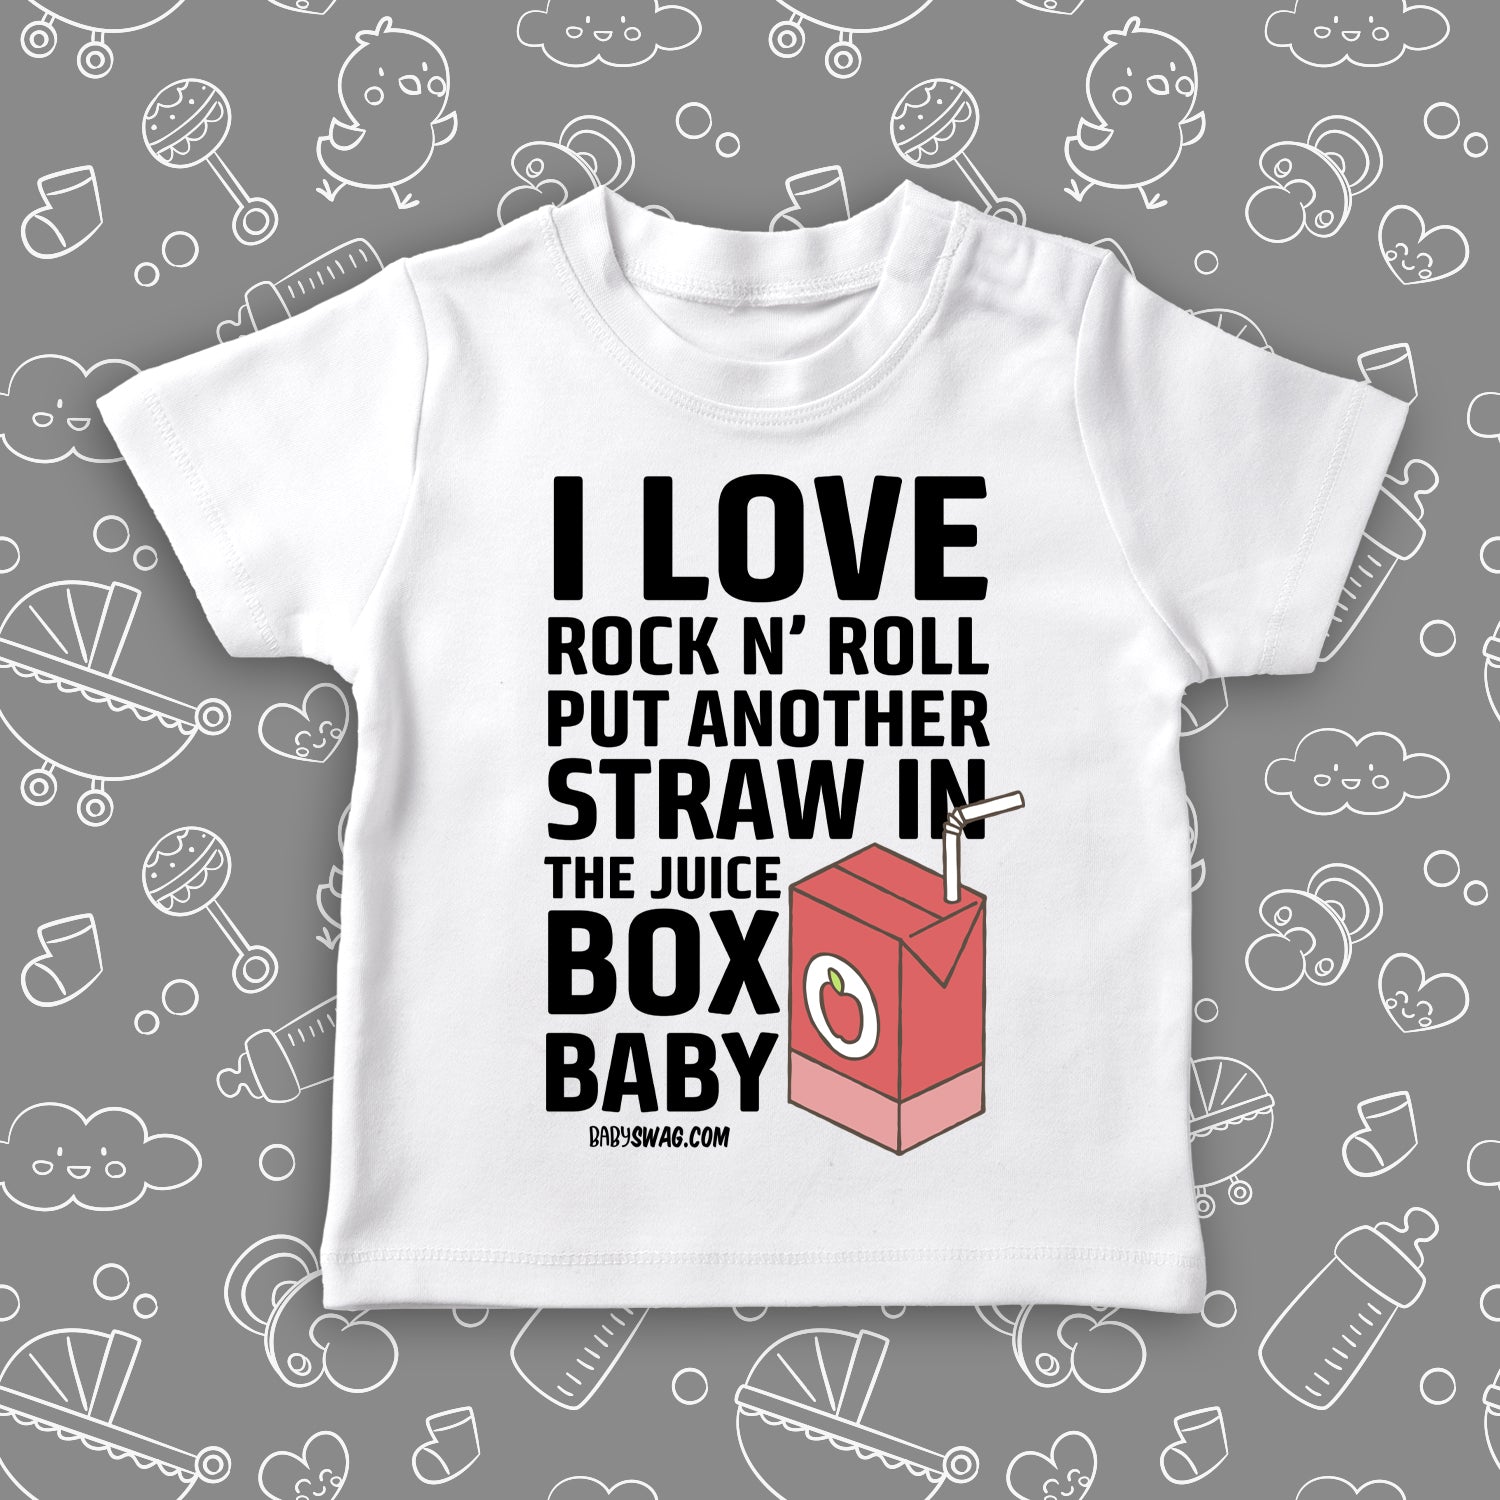 Funny toddler graphic tee with saying "I Love Rock N' Roll, Put Another Straw In The Juice Box Baby" in white.